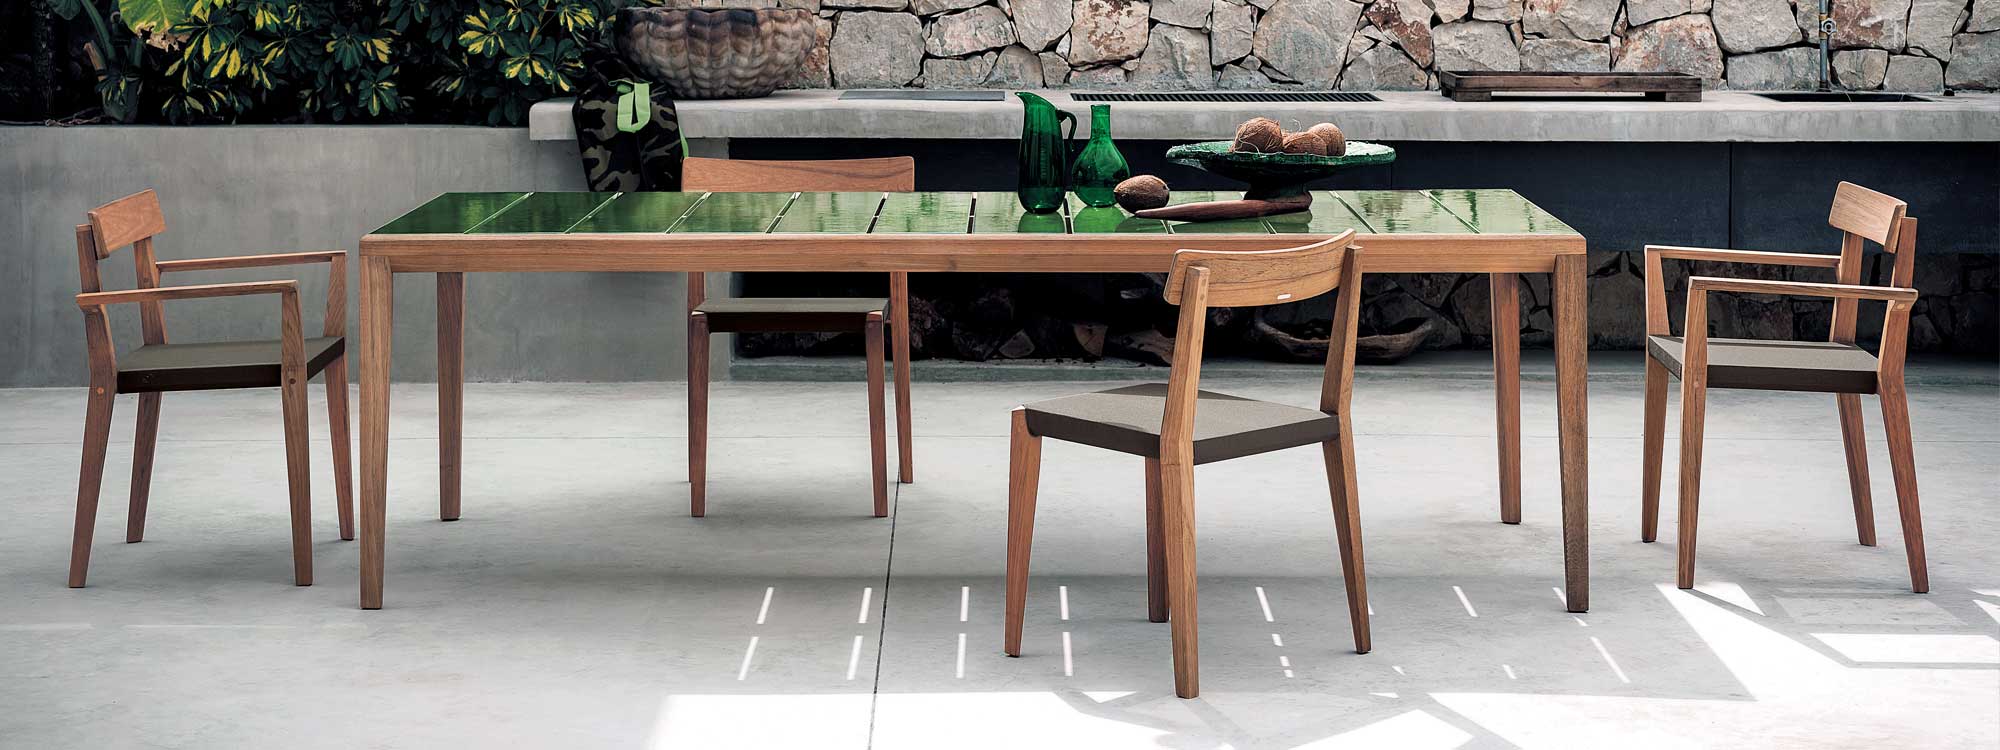 Image of RODA Teka teak dining chairs with Brown Batyline mesh seats, next to Teka teak garden table with Green glazes Gres ceramic table top